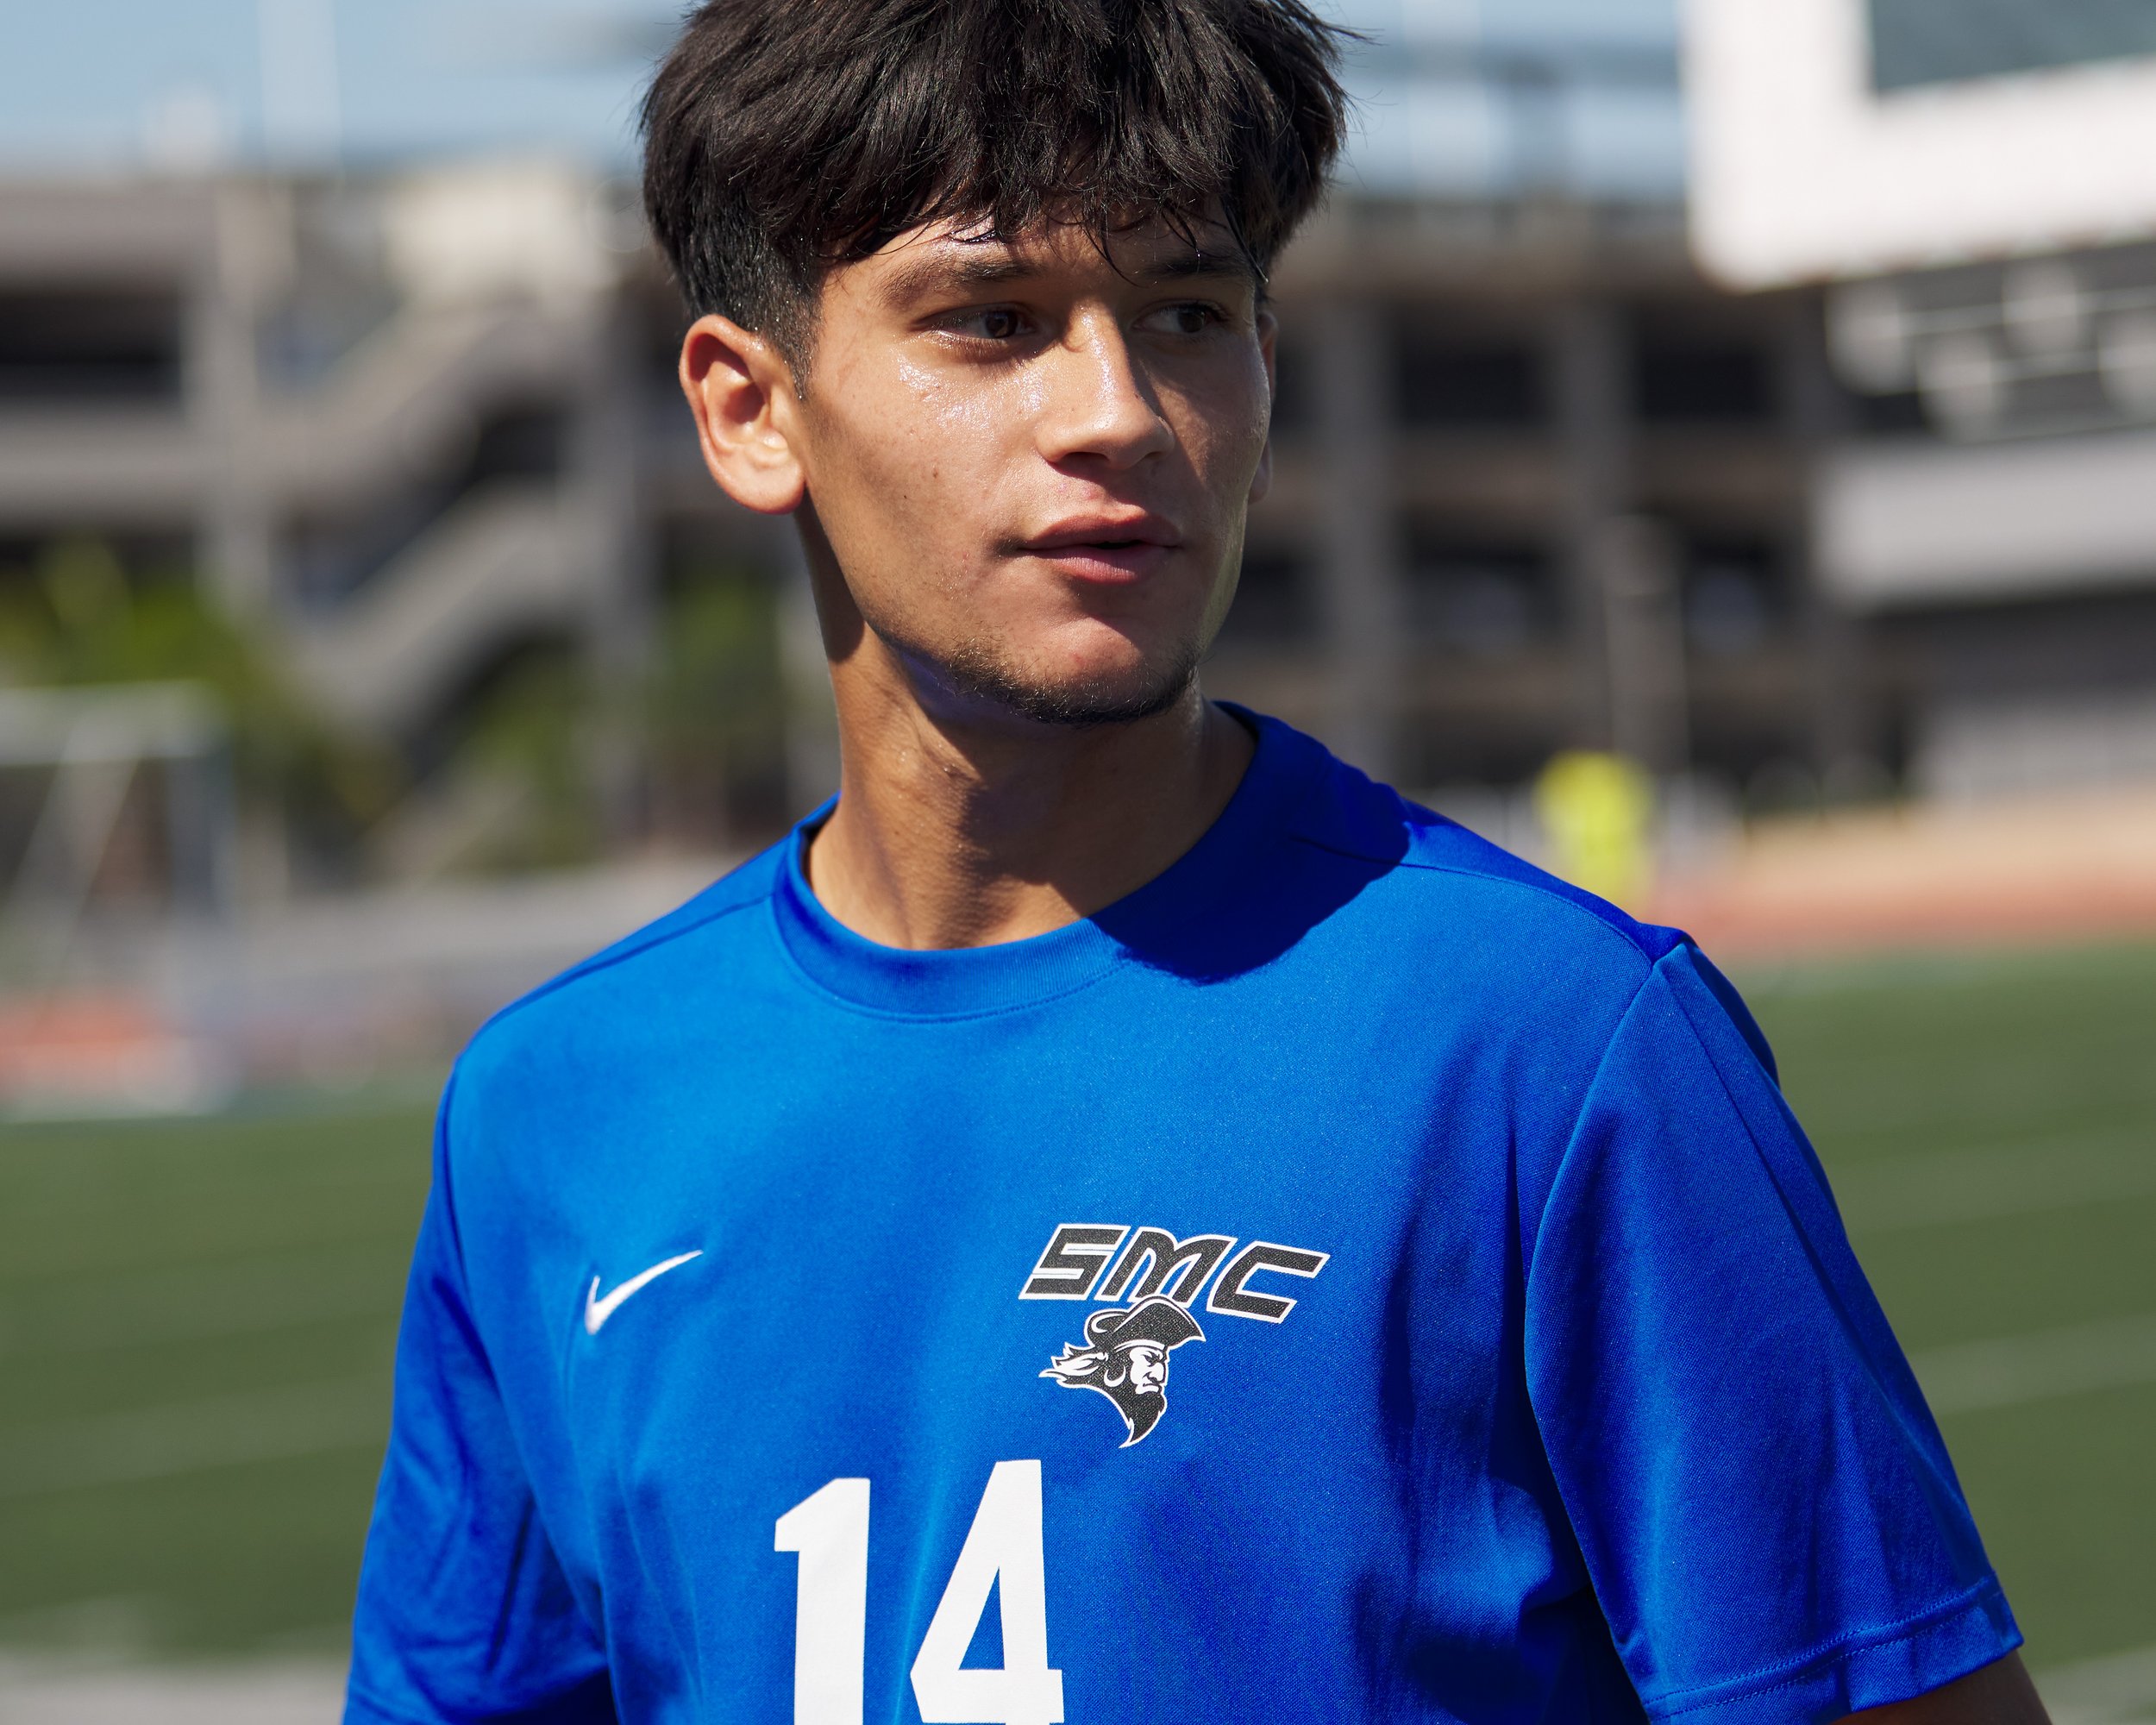  Santa Monica College Corsairs' Jose Urdiano during the men's soccer match against the Los Angeles Harbor College Seahawks on Friday, Sept. 9, 2023, at Corsair Field in Santa Monica, Calif. The Corsairs won 7-1. (Nicholas McCall | The Corsair) 